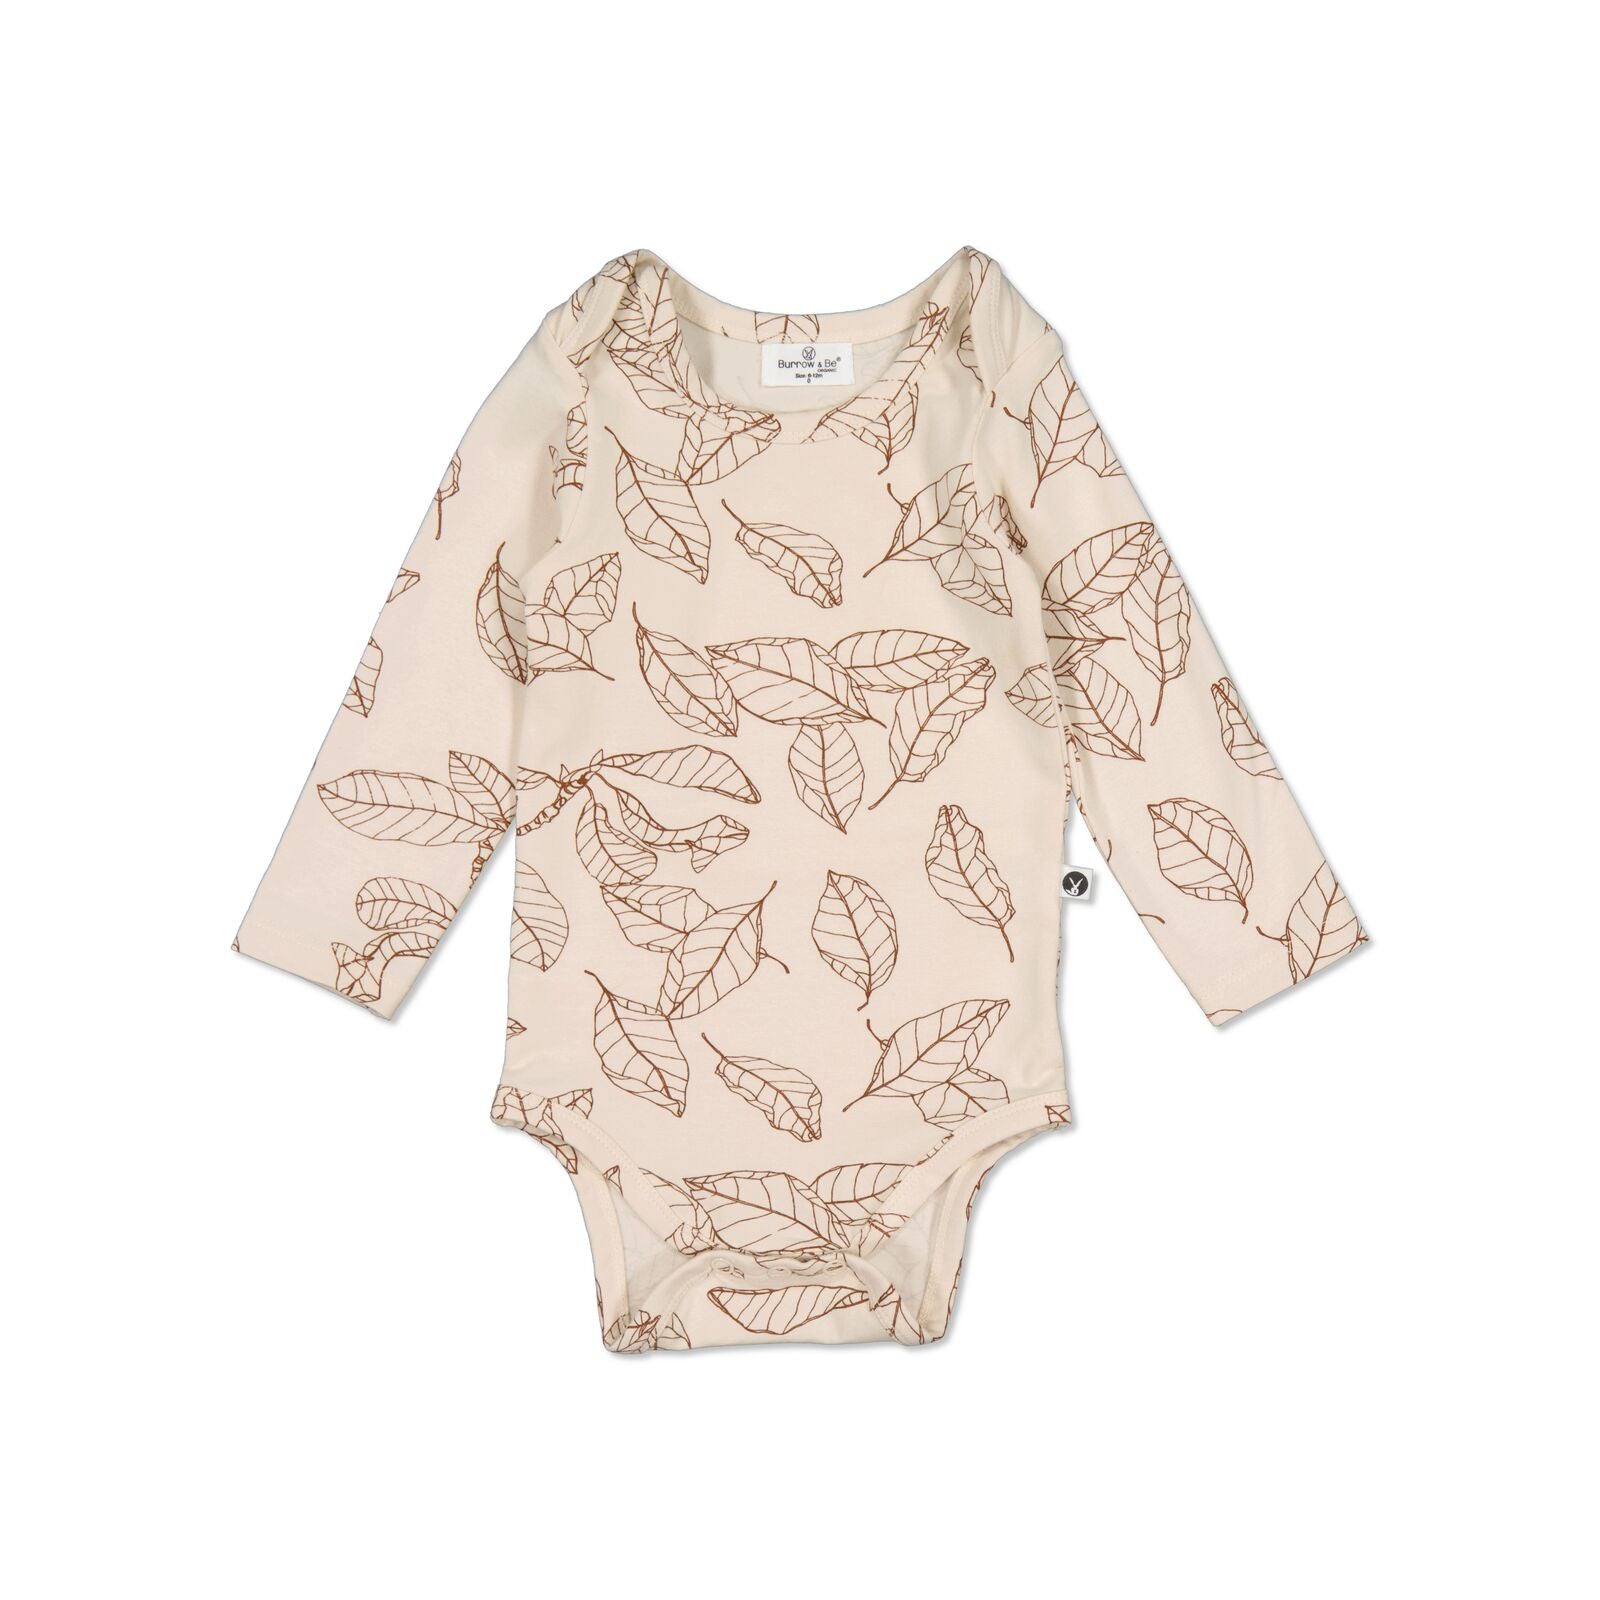 Burrow & Be | Long Sleeve Body Suit - Leaves - Found My Way Invercargill